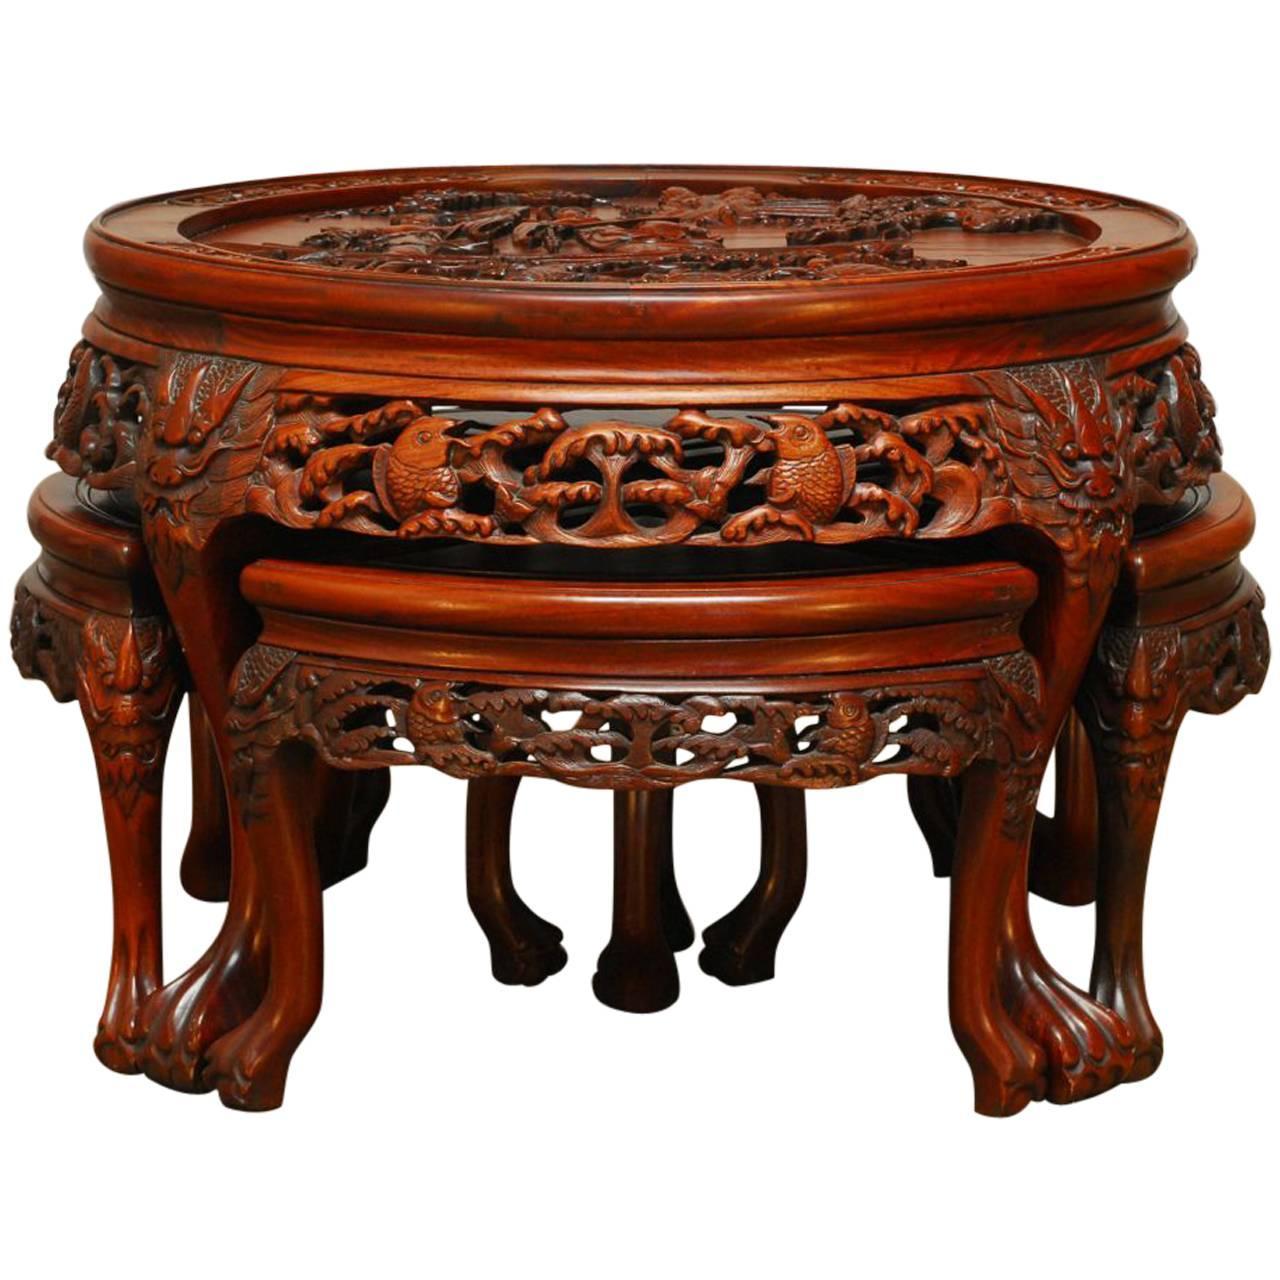 Round Chinese Carved Rosewood Tea Table with Nesting Stools For Sale at